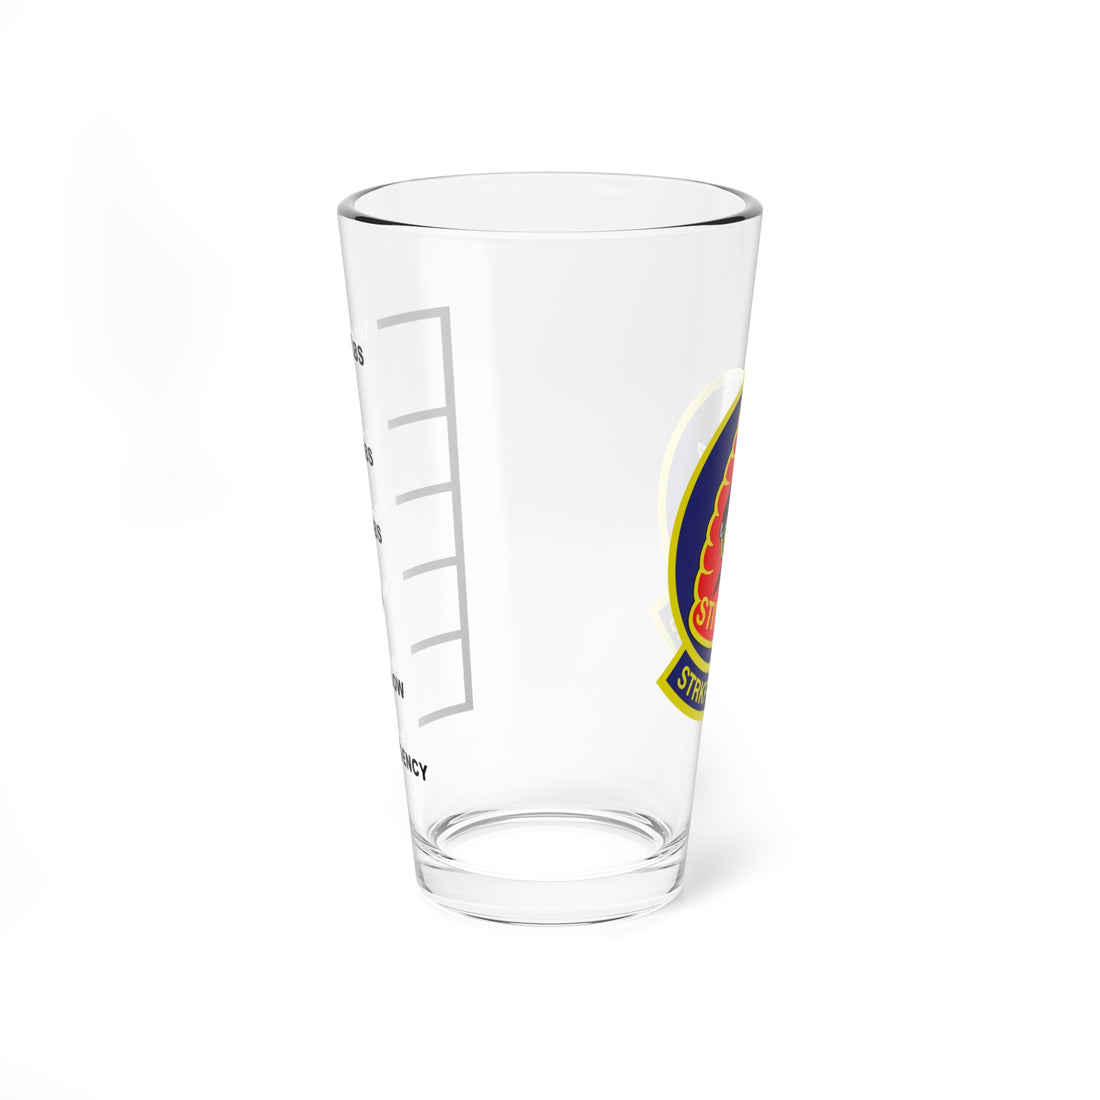 VFA-113 "Stingers" Fuel Low Pint Glass, Navy Strike Fighter Squadron flying the F/A-18 Hornet